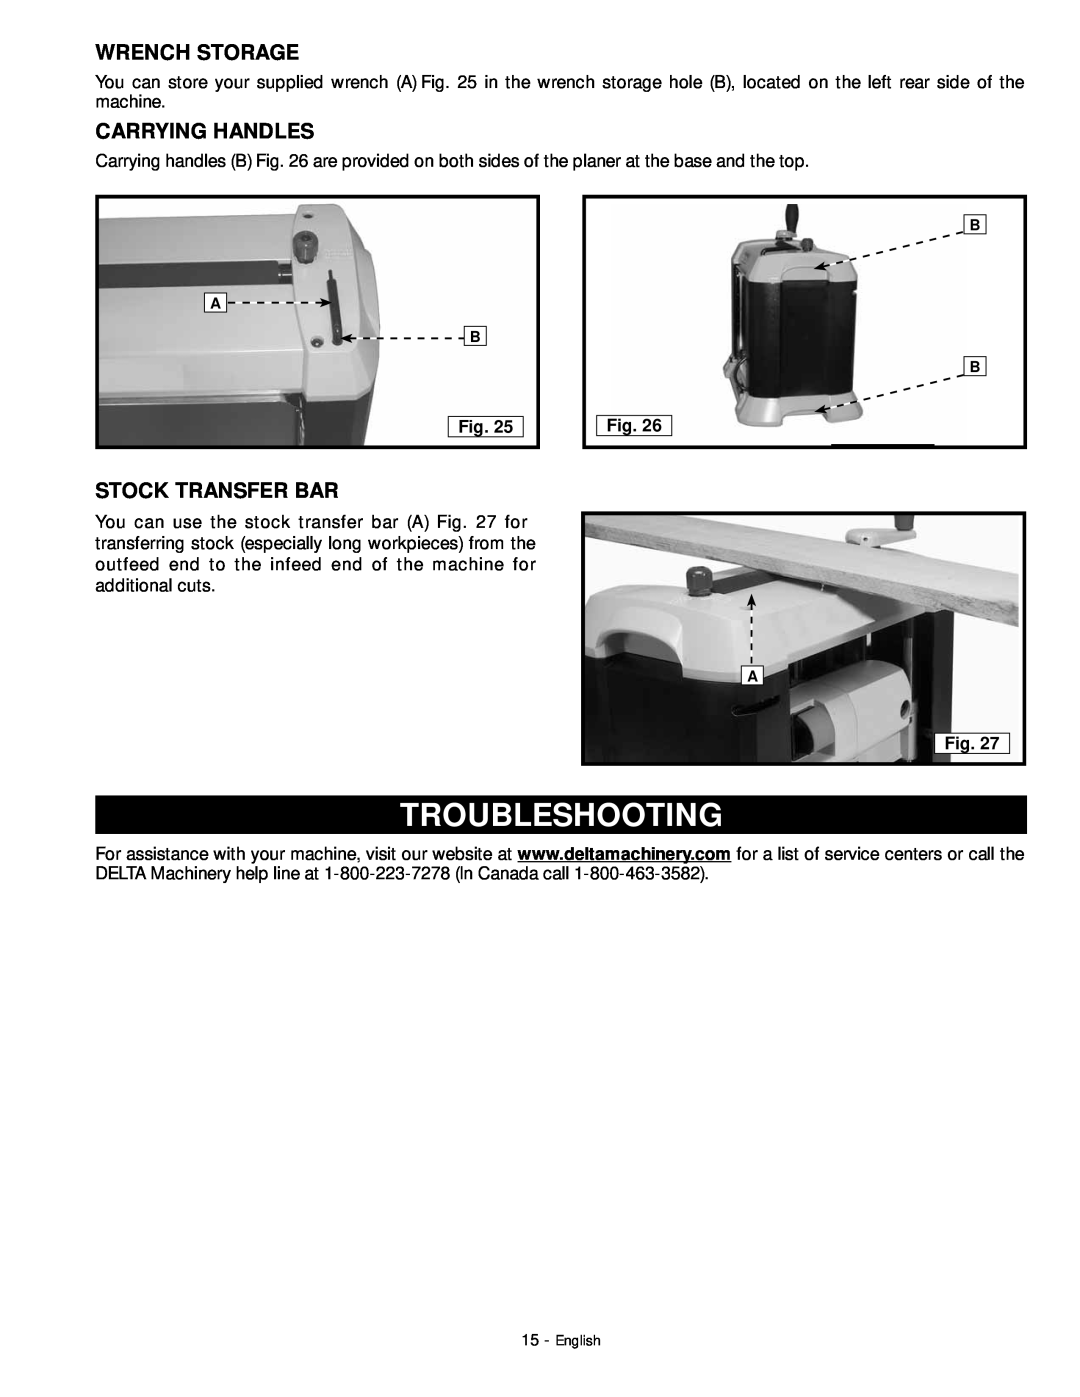 DeWalt 18657 instruction manual Troubleshooting, Wrench Storage, Carrying Handles, Stock Transfer Bar 